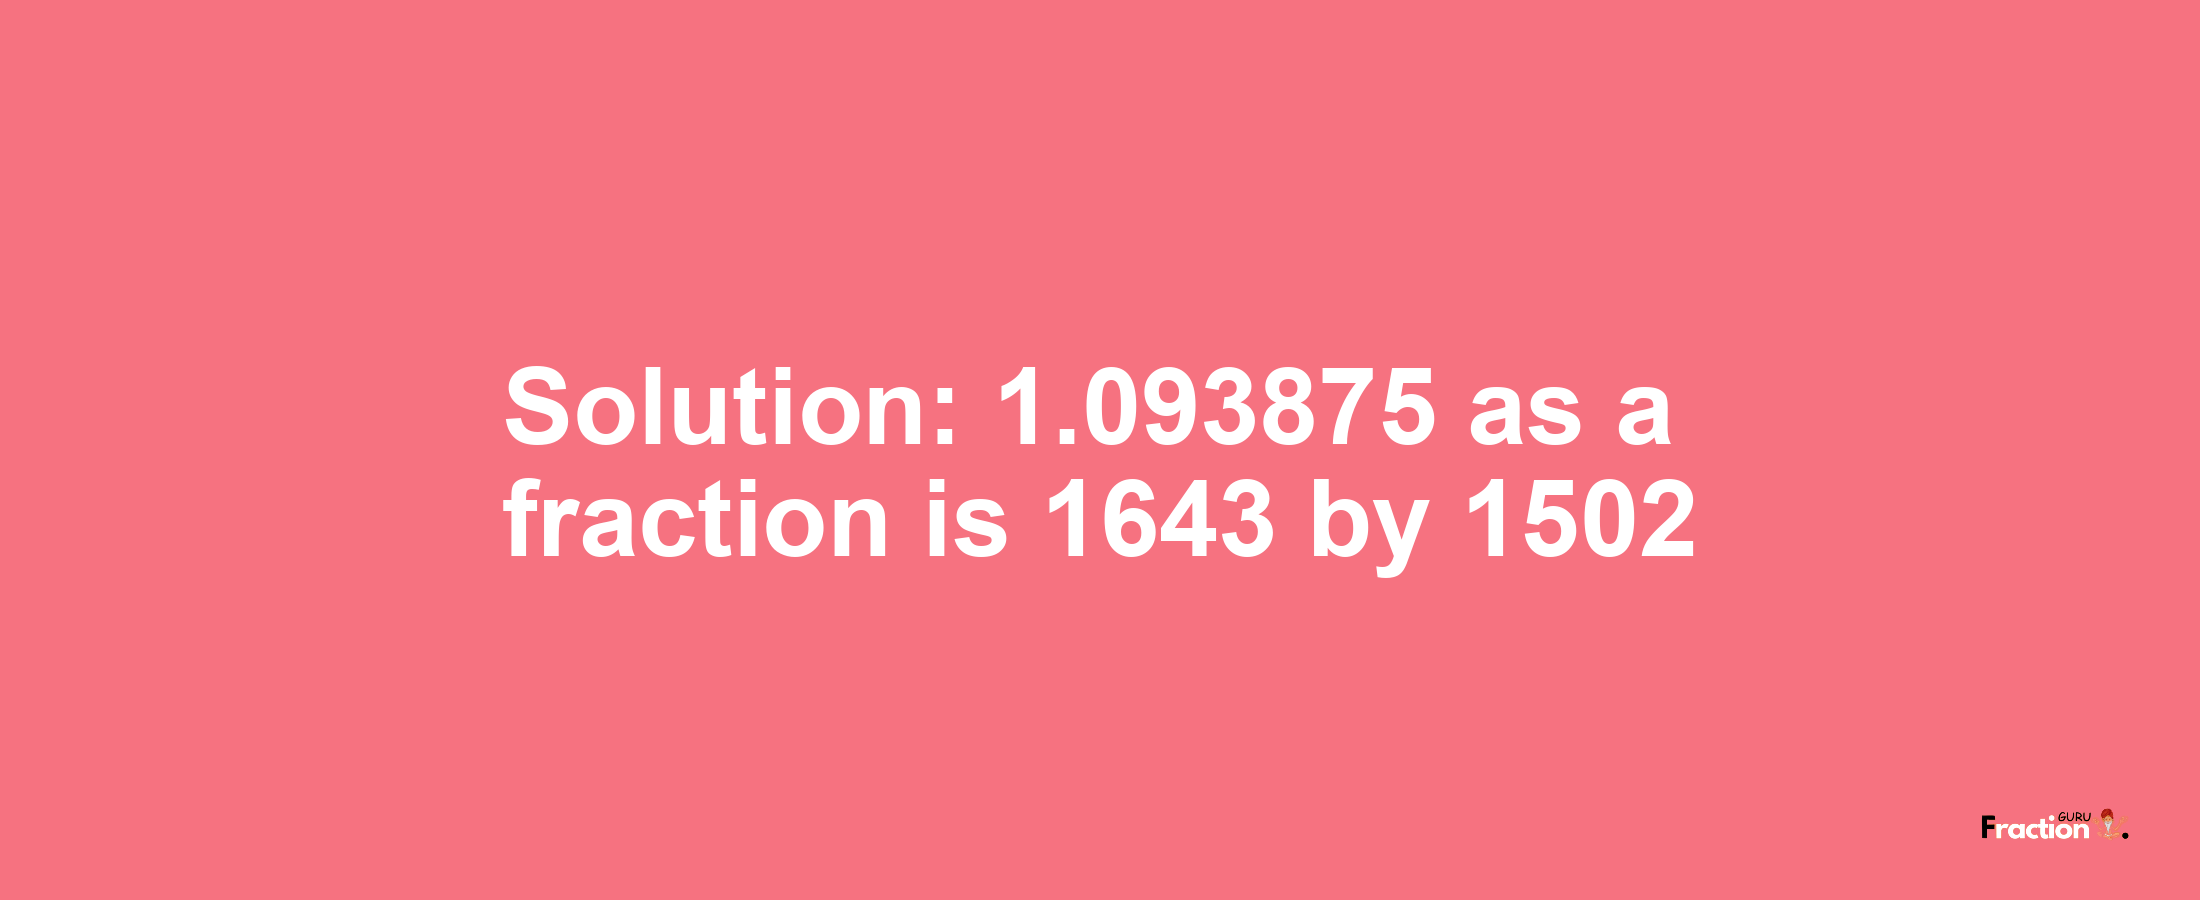 Solution:1.093875 as a fraction is 1643/1502